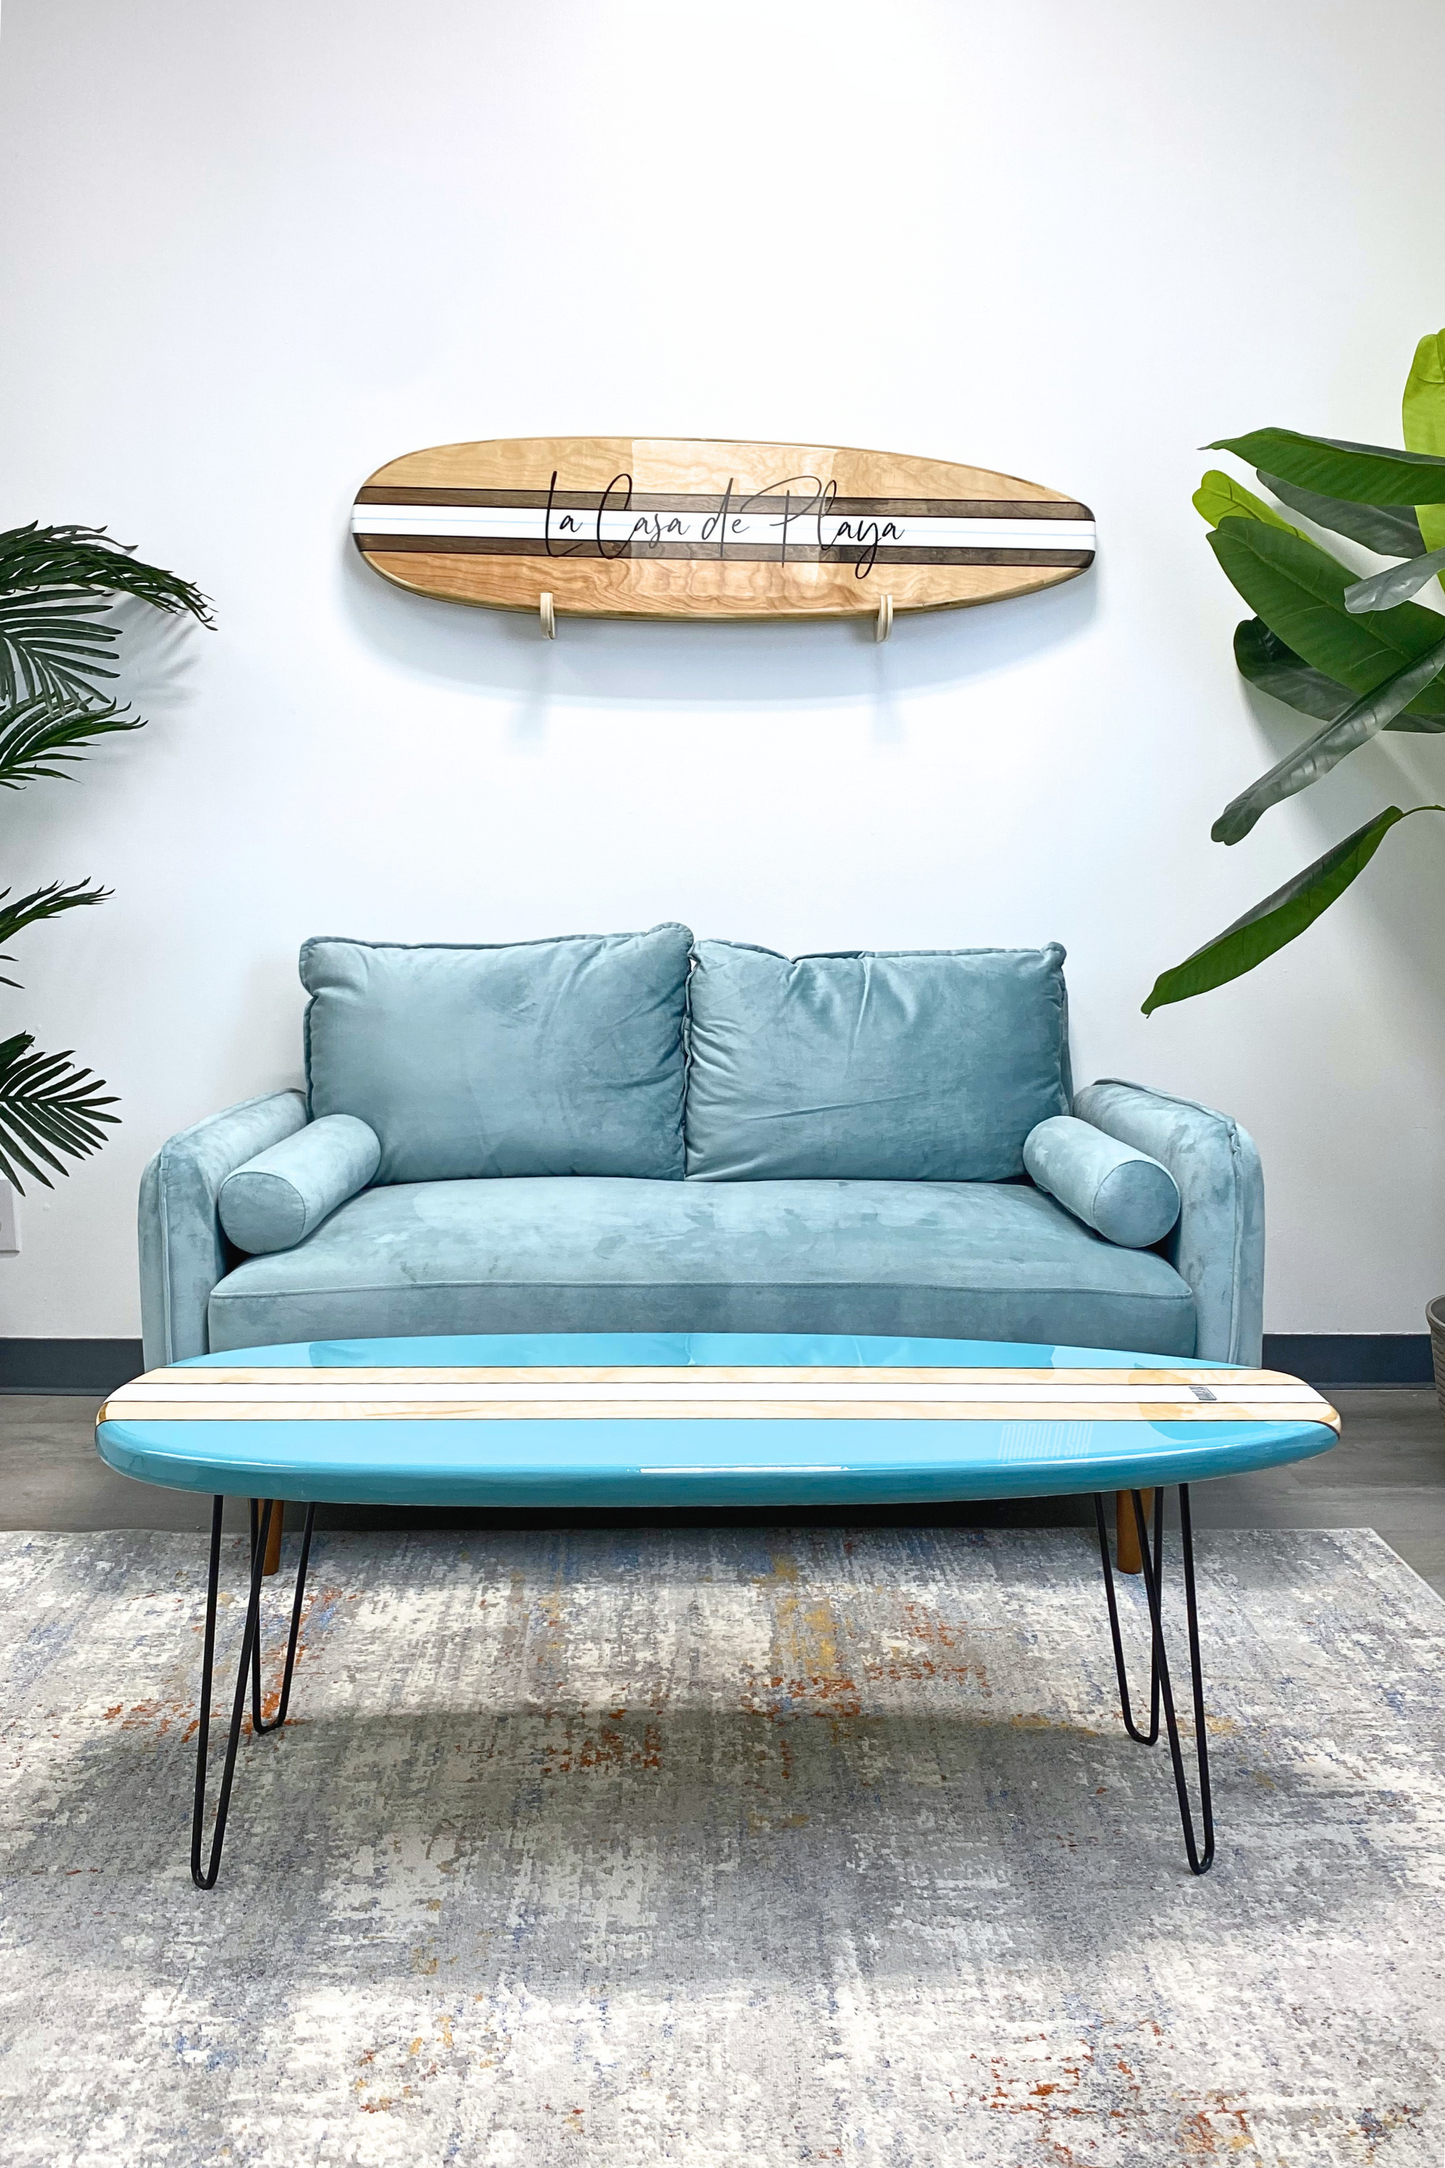 The King Tide Surfboard Coffee Table